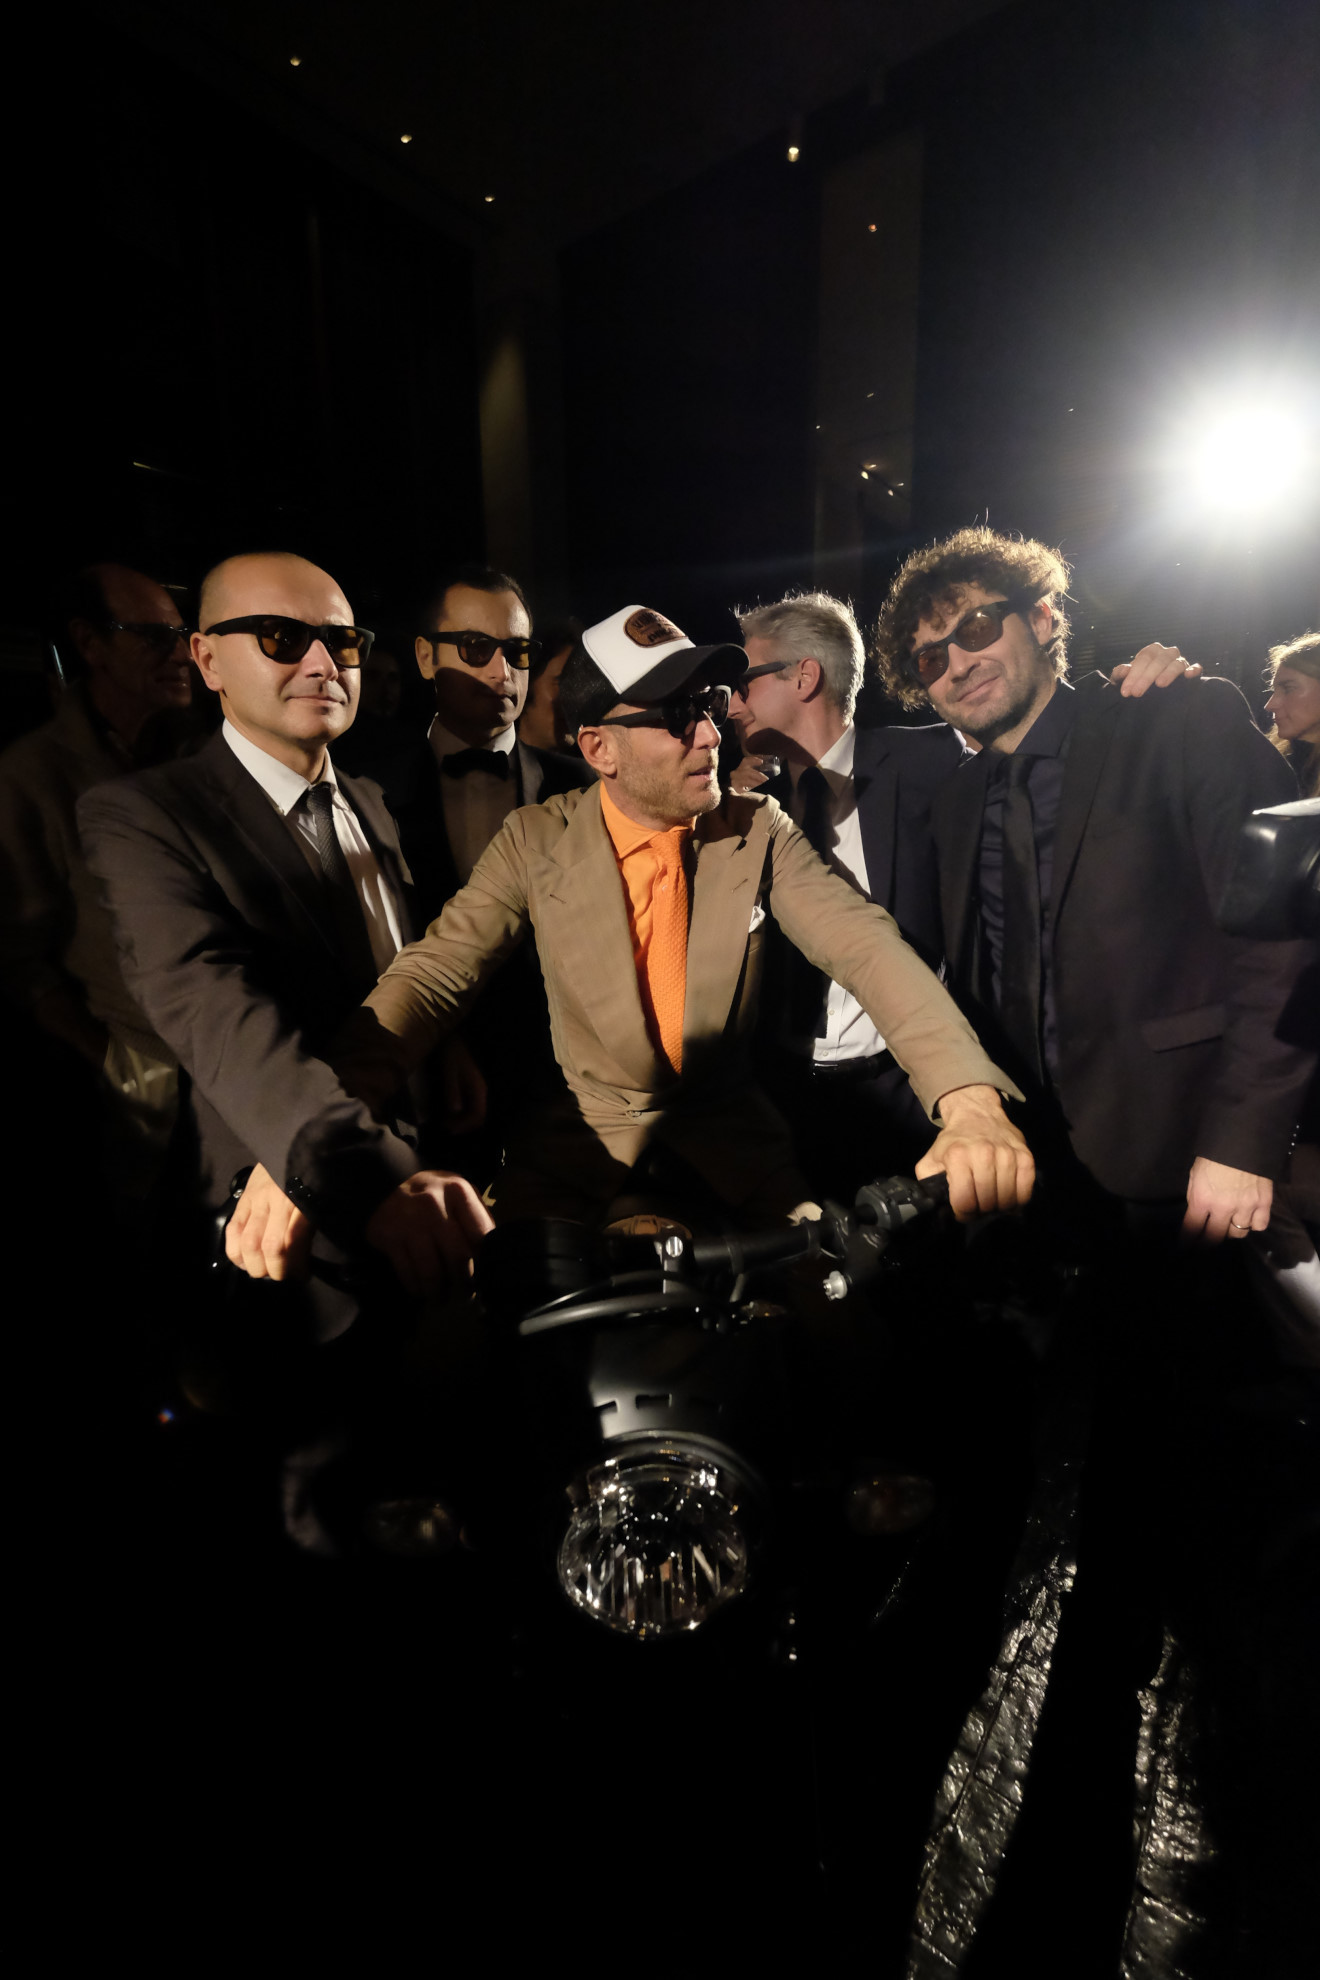 Full Take, MMS Only: Italia Independent X Ducati Celebrate The Launch Of The Scrambler Ducati